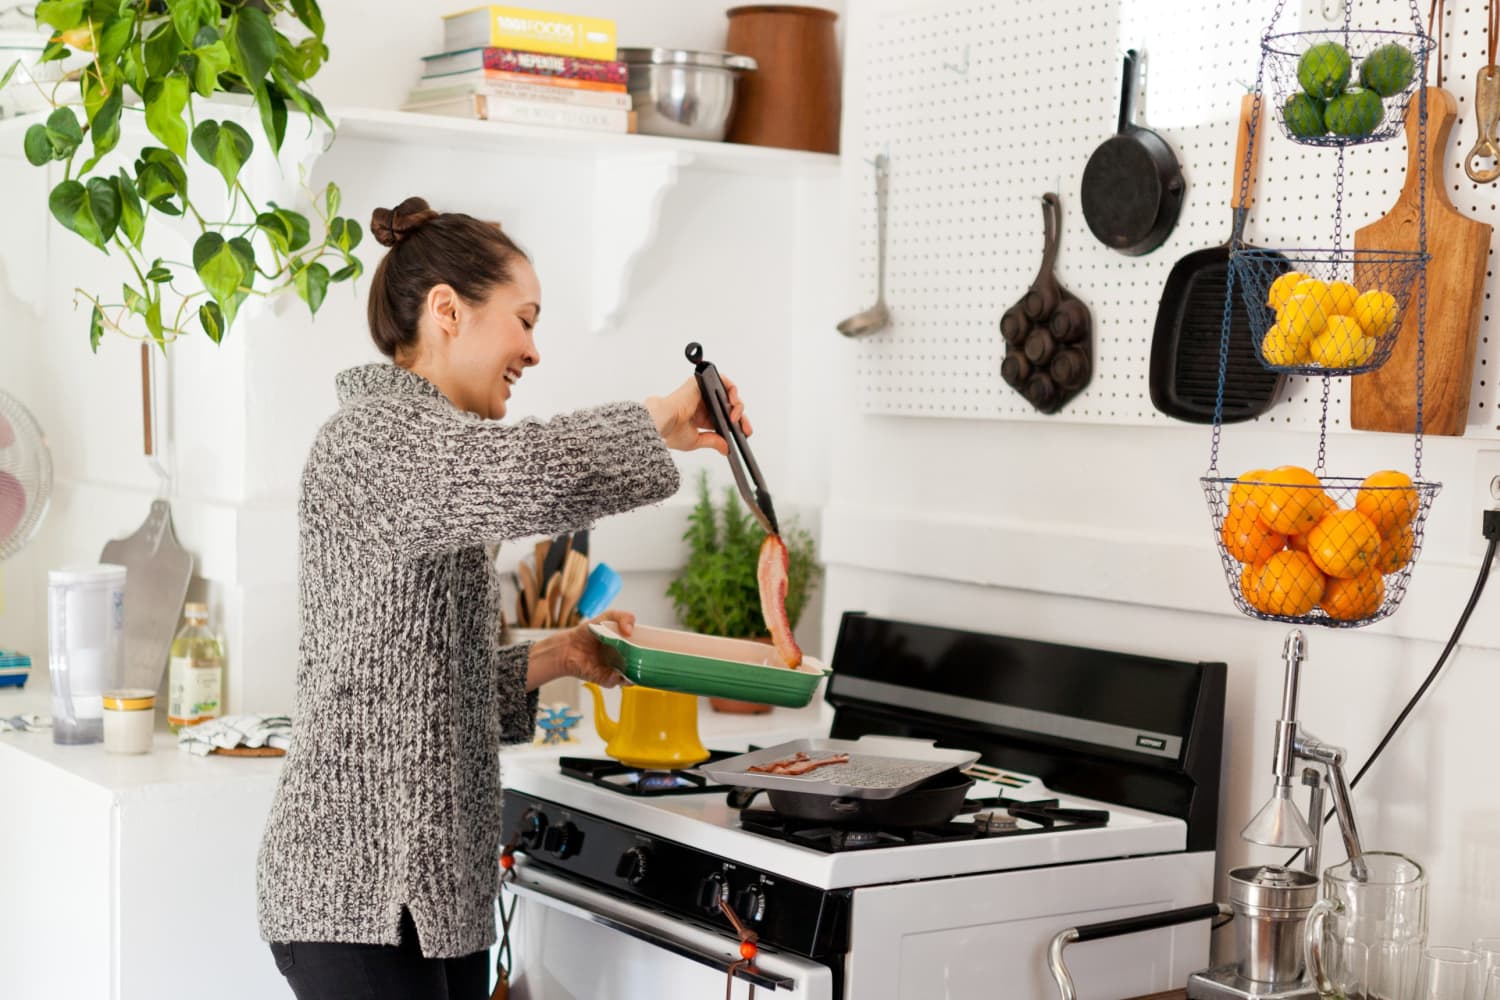 10 Stove Safety Tips Every Cook Should Know | The Kitchn